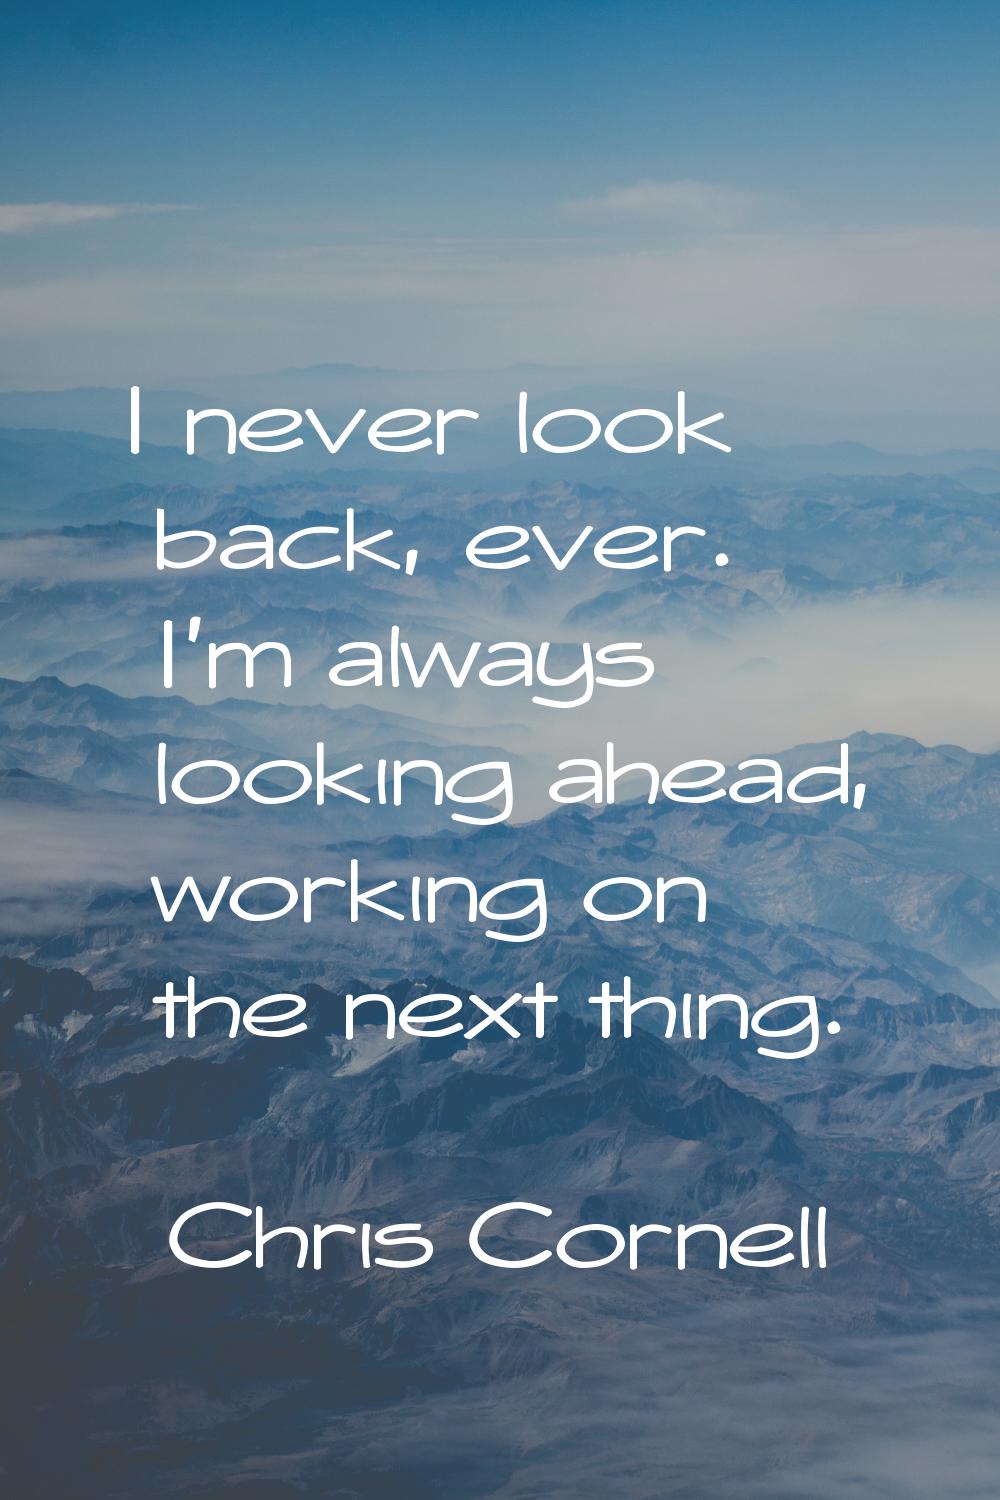 I never look back, ever. I'm always looking ahead, working on the next thing.